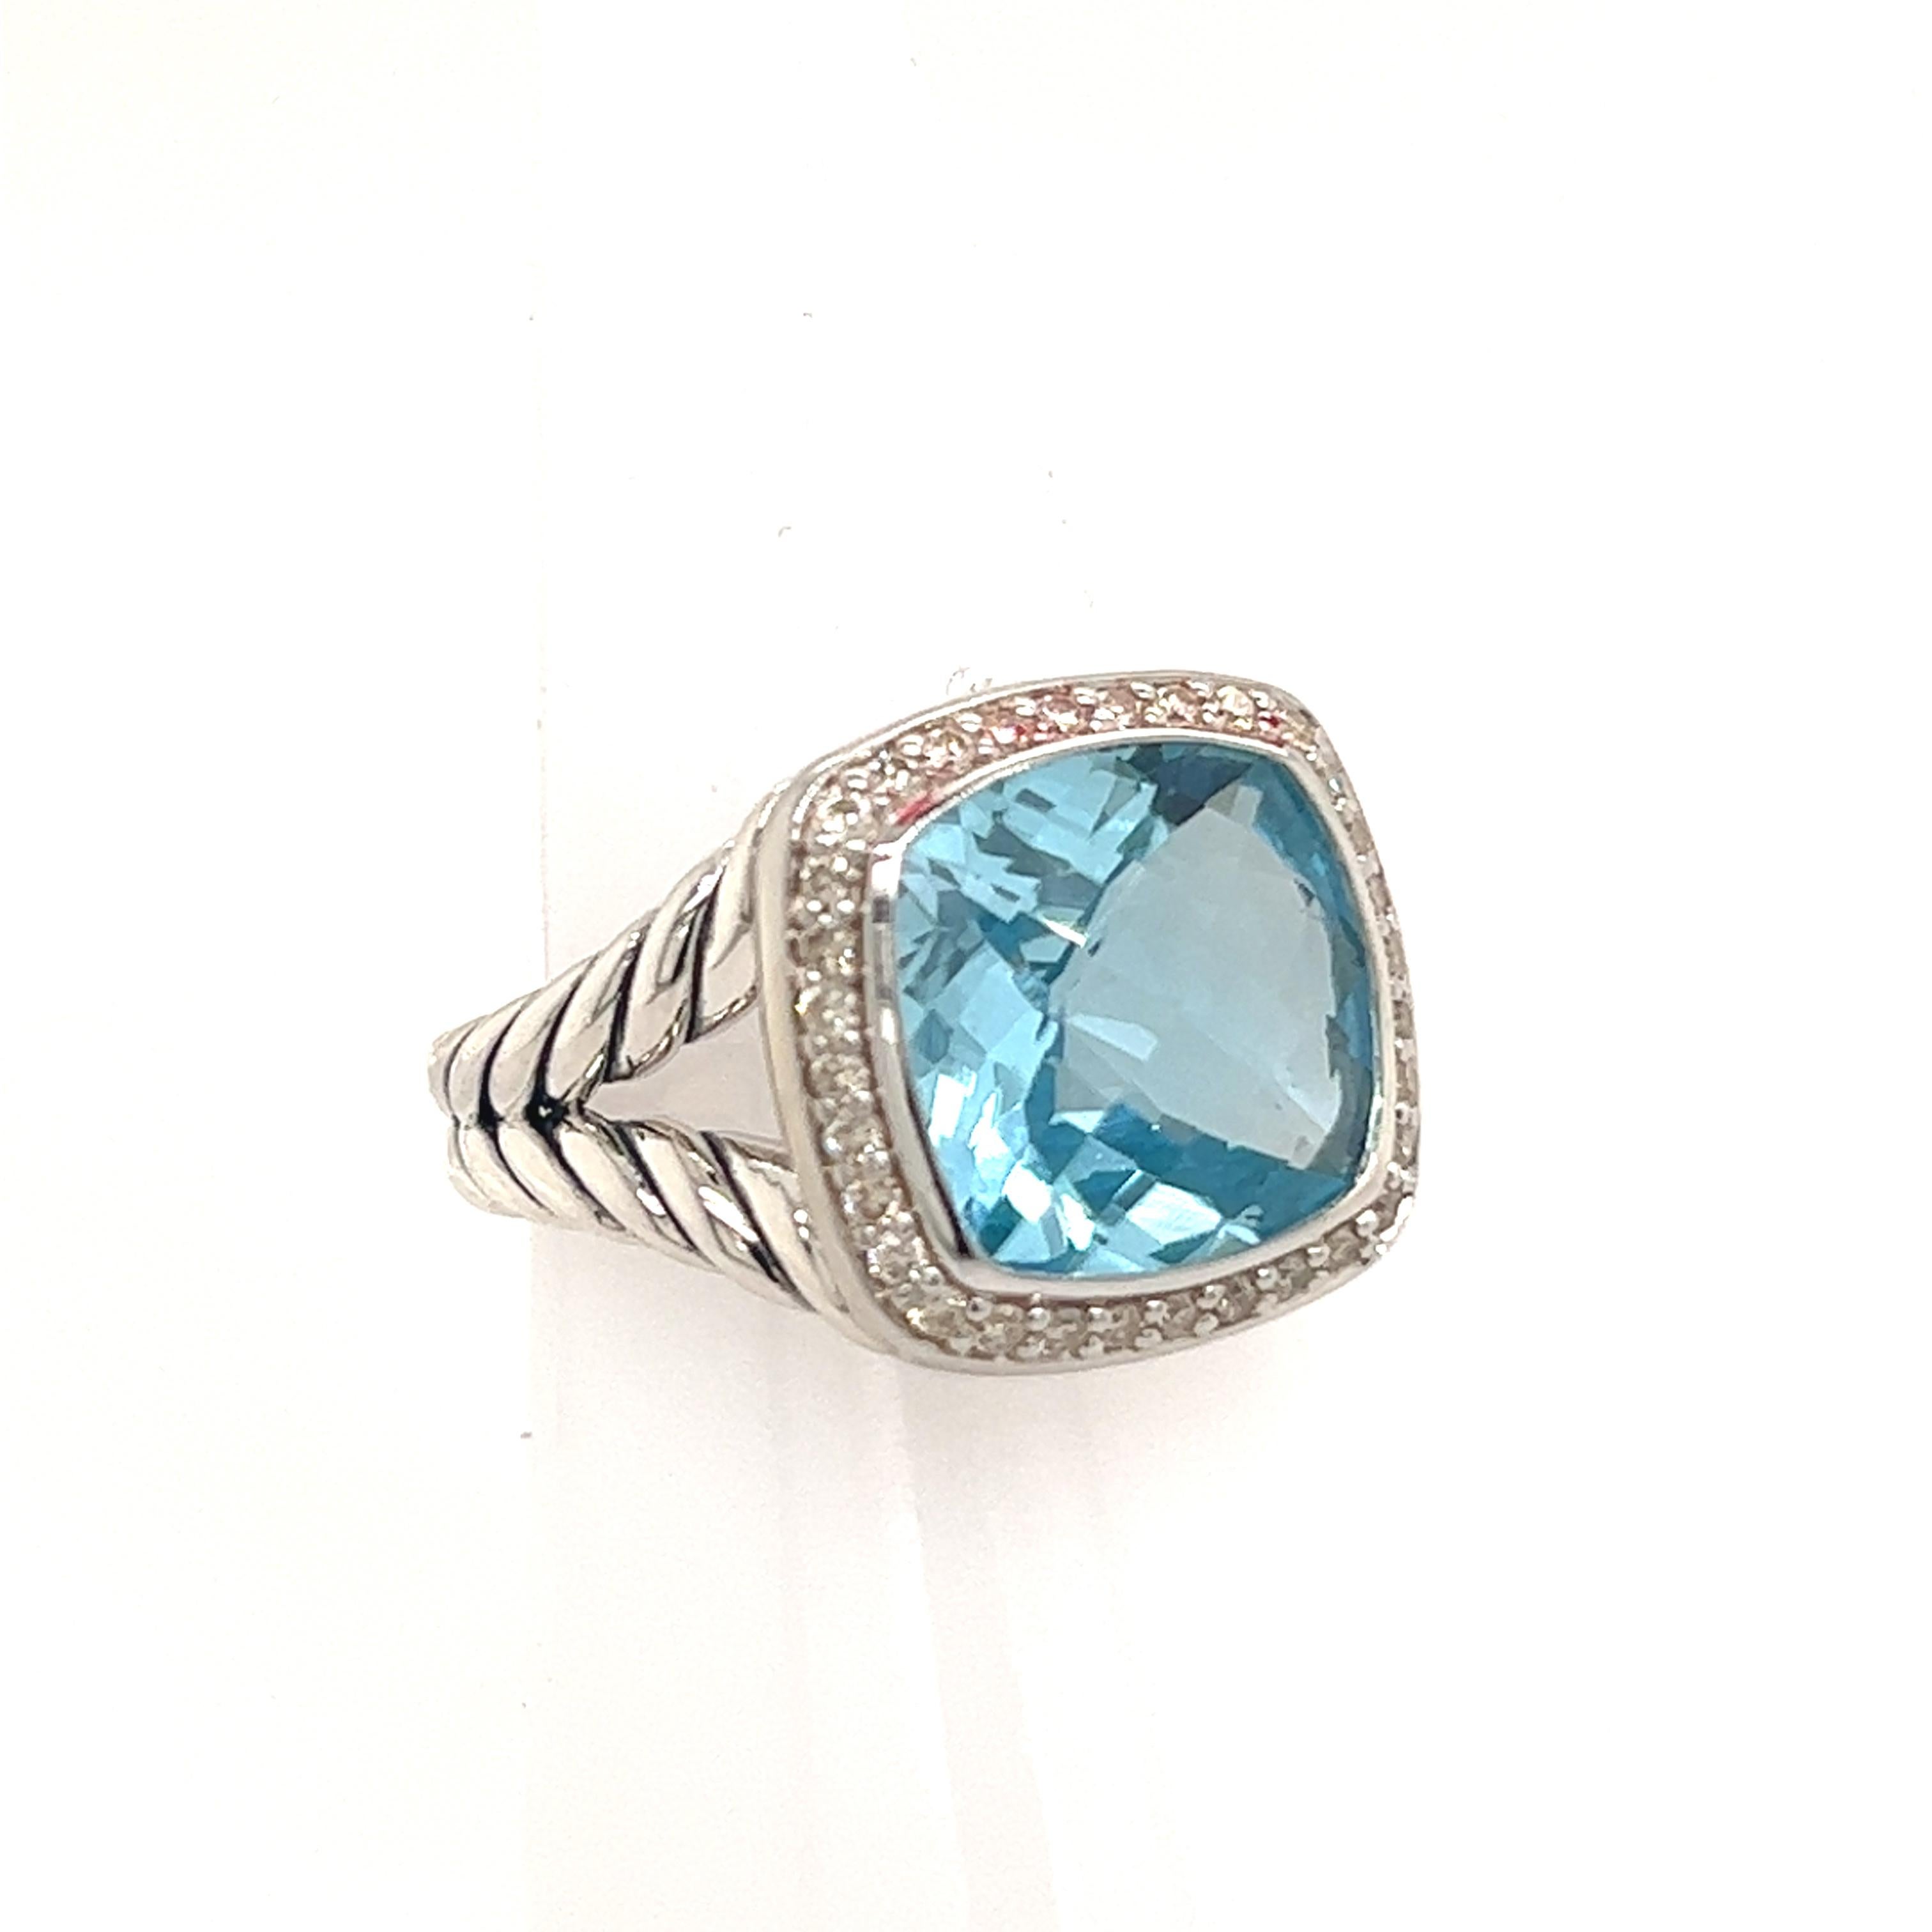 David Yurman Estate Blue Topaz Diamond Albion Ring Size 7.25 Silver 0.22 TCW DY150

Retail: $1,175.00

Ring from ALBION COLLECTION

This elegant Authentic David Yurman ring is made of sterling silver.

TRUSTED SELLER SINCE 2002

PLEASE SEE OUR